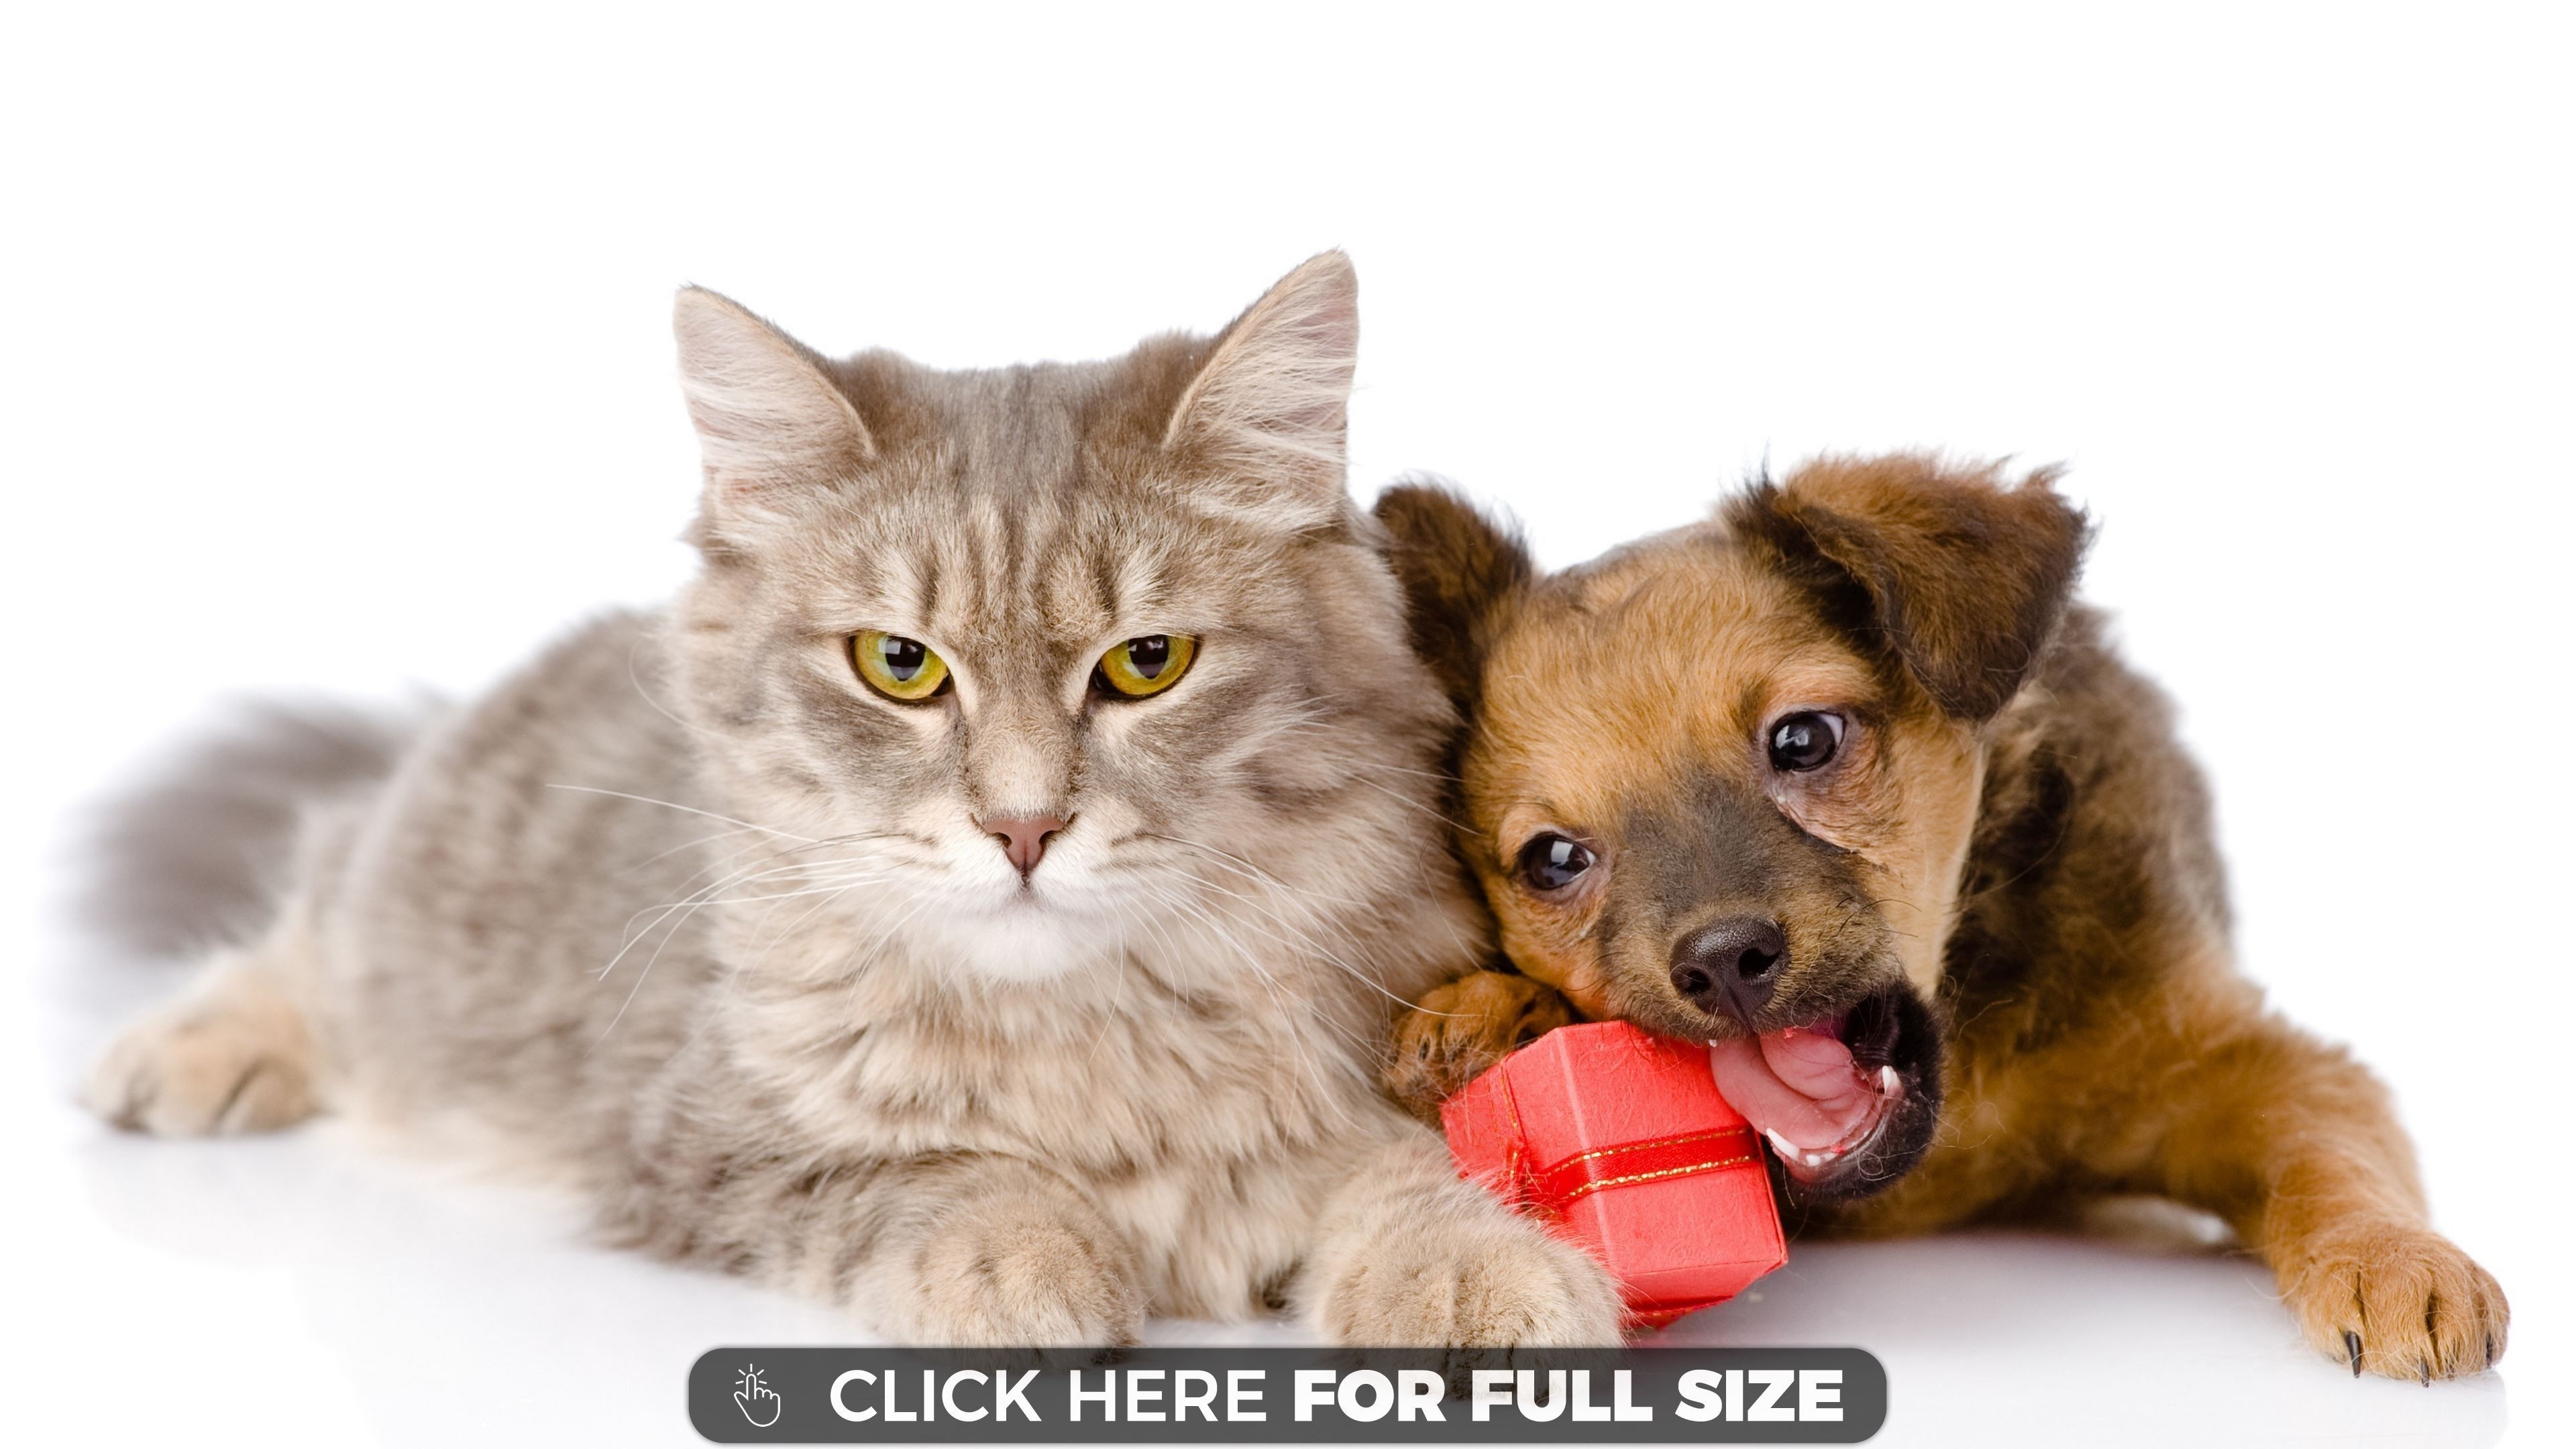 3840x2160 Cute cat and dog wallpapers coin news reporters pictures of cats dogs  together jpg  Cute